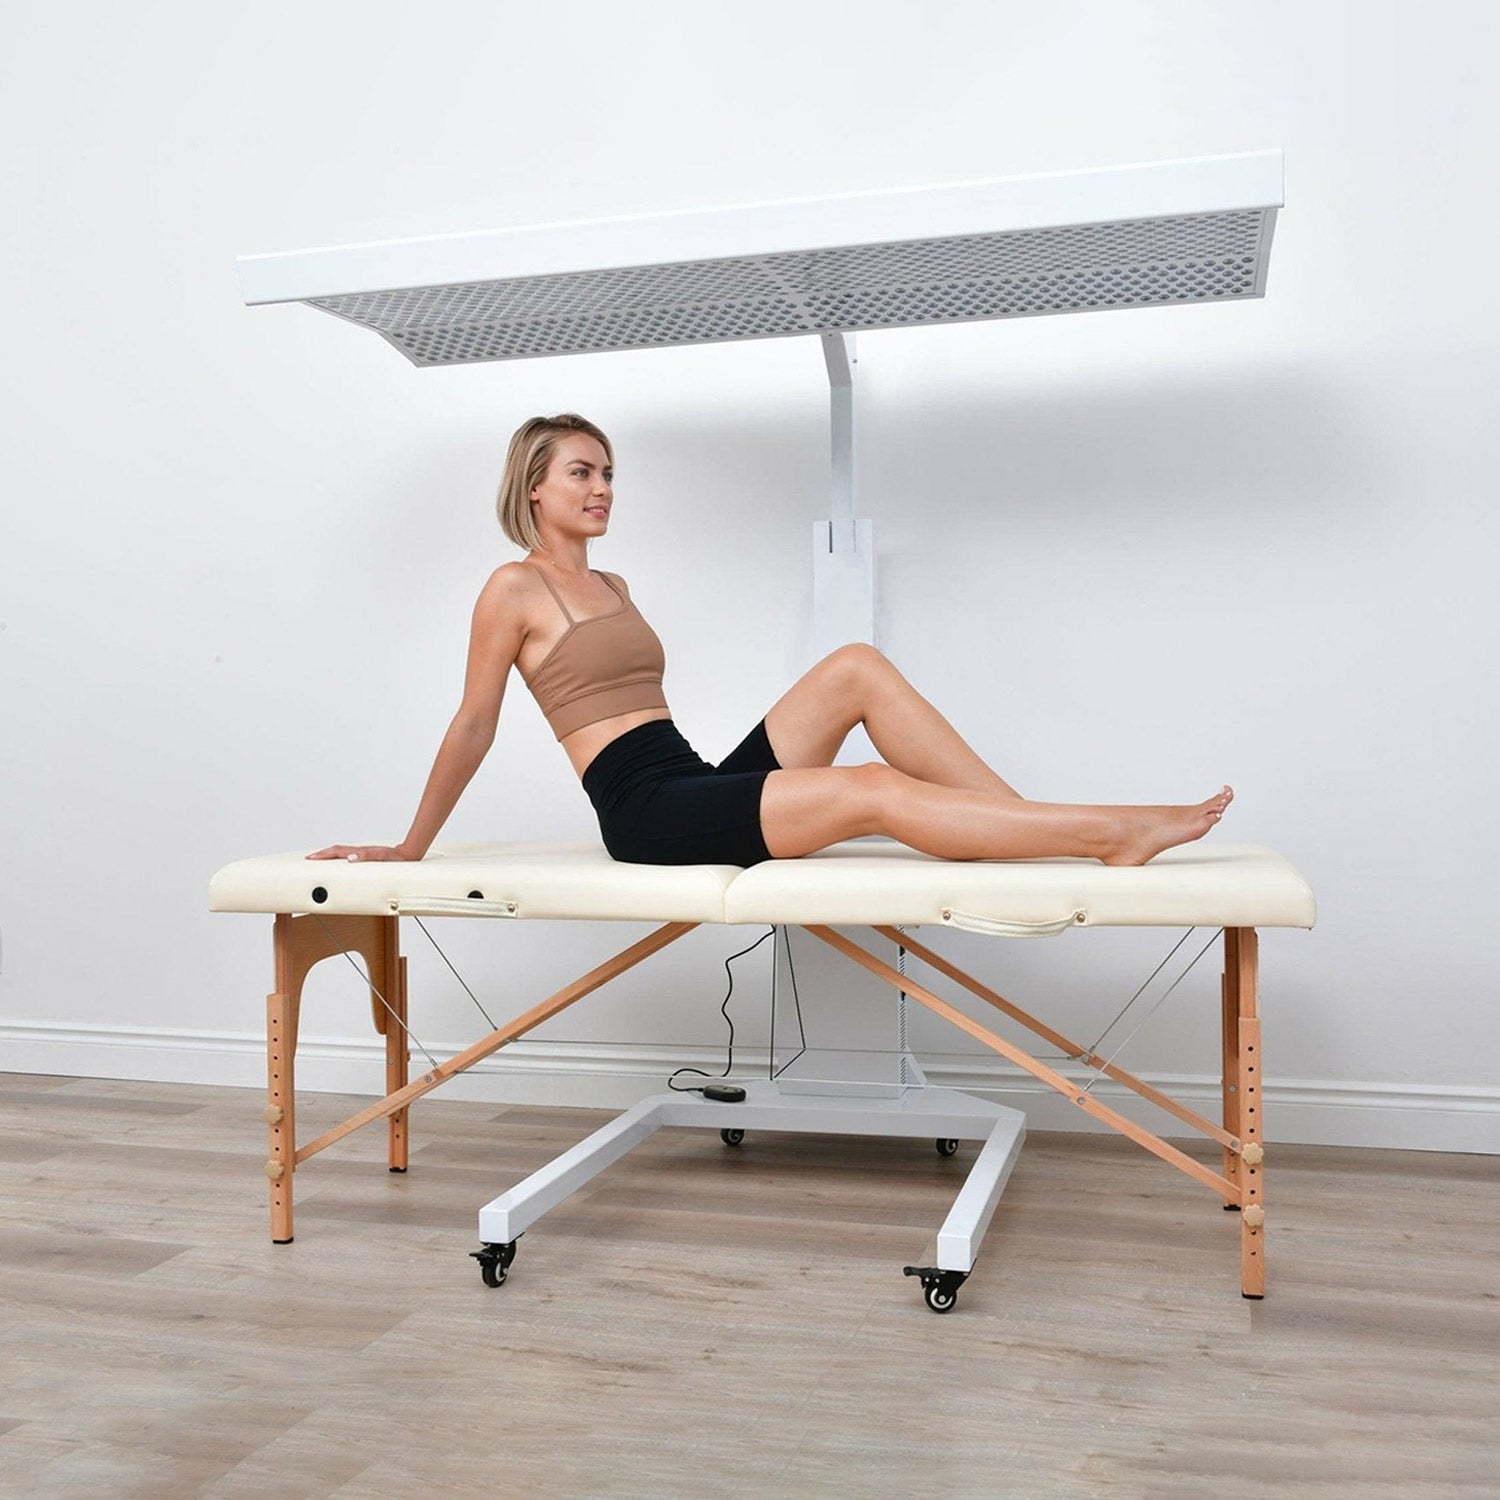 Top Commercial Red Light Therapy Bed – Megelin